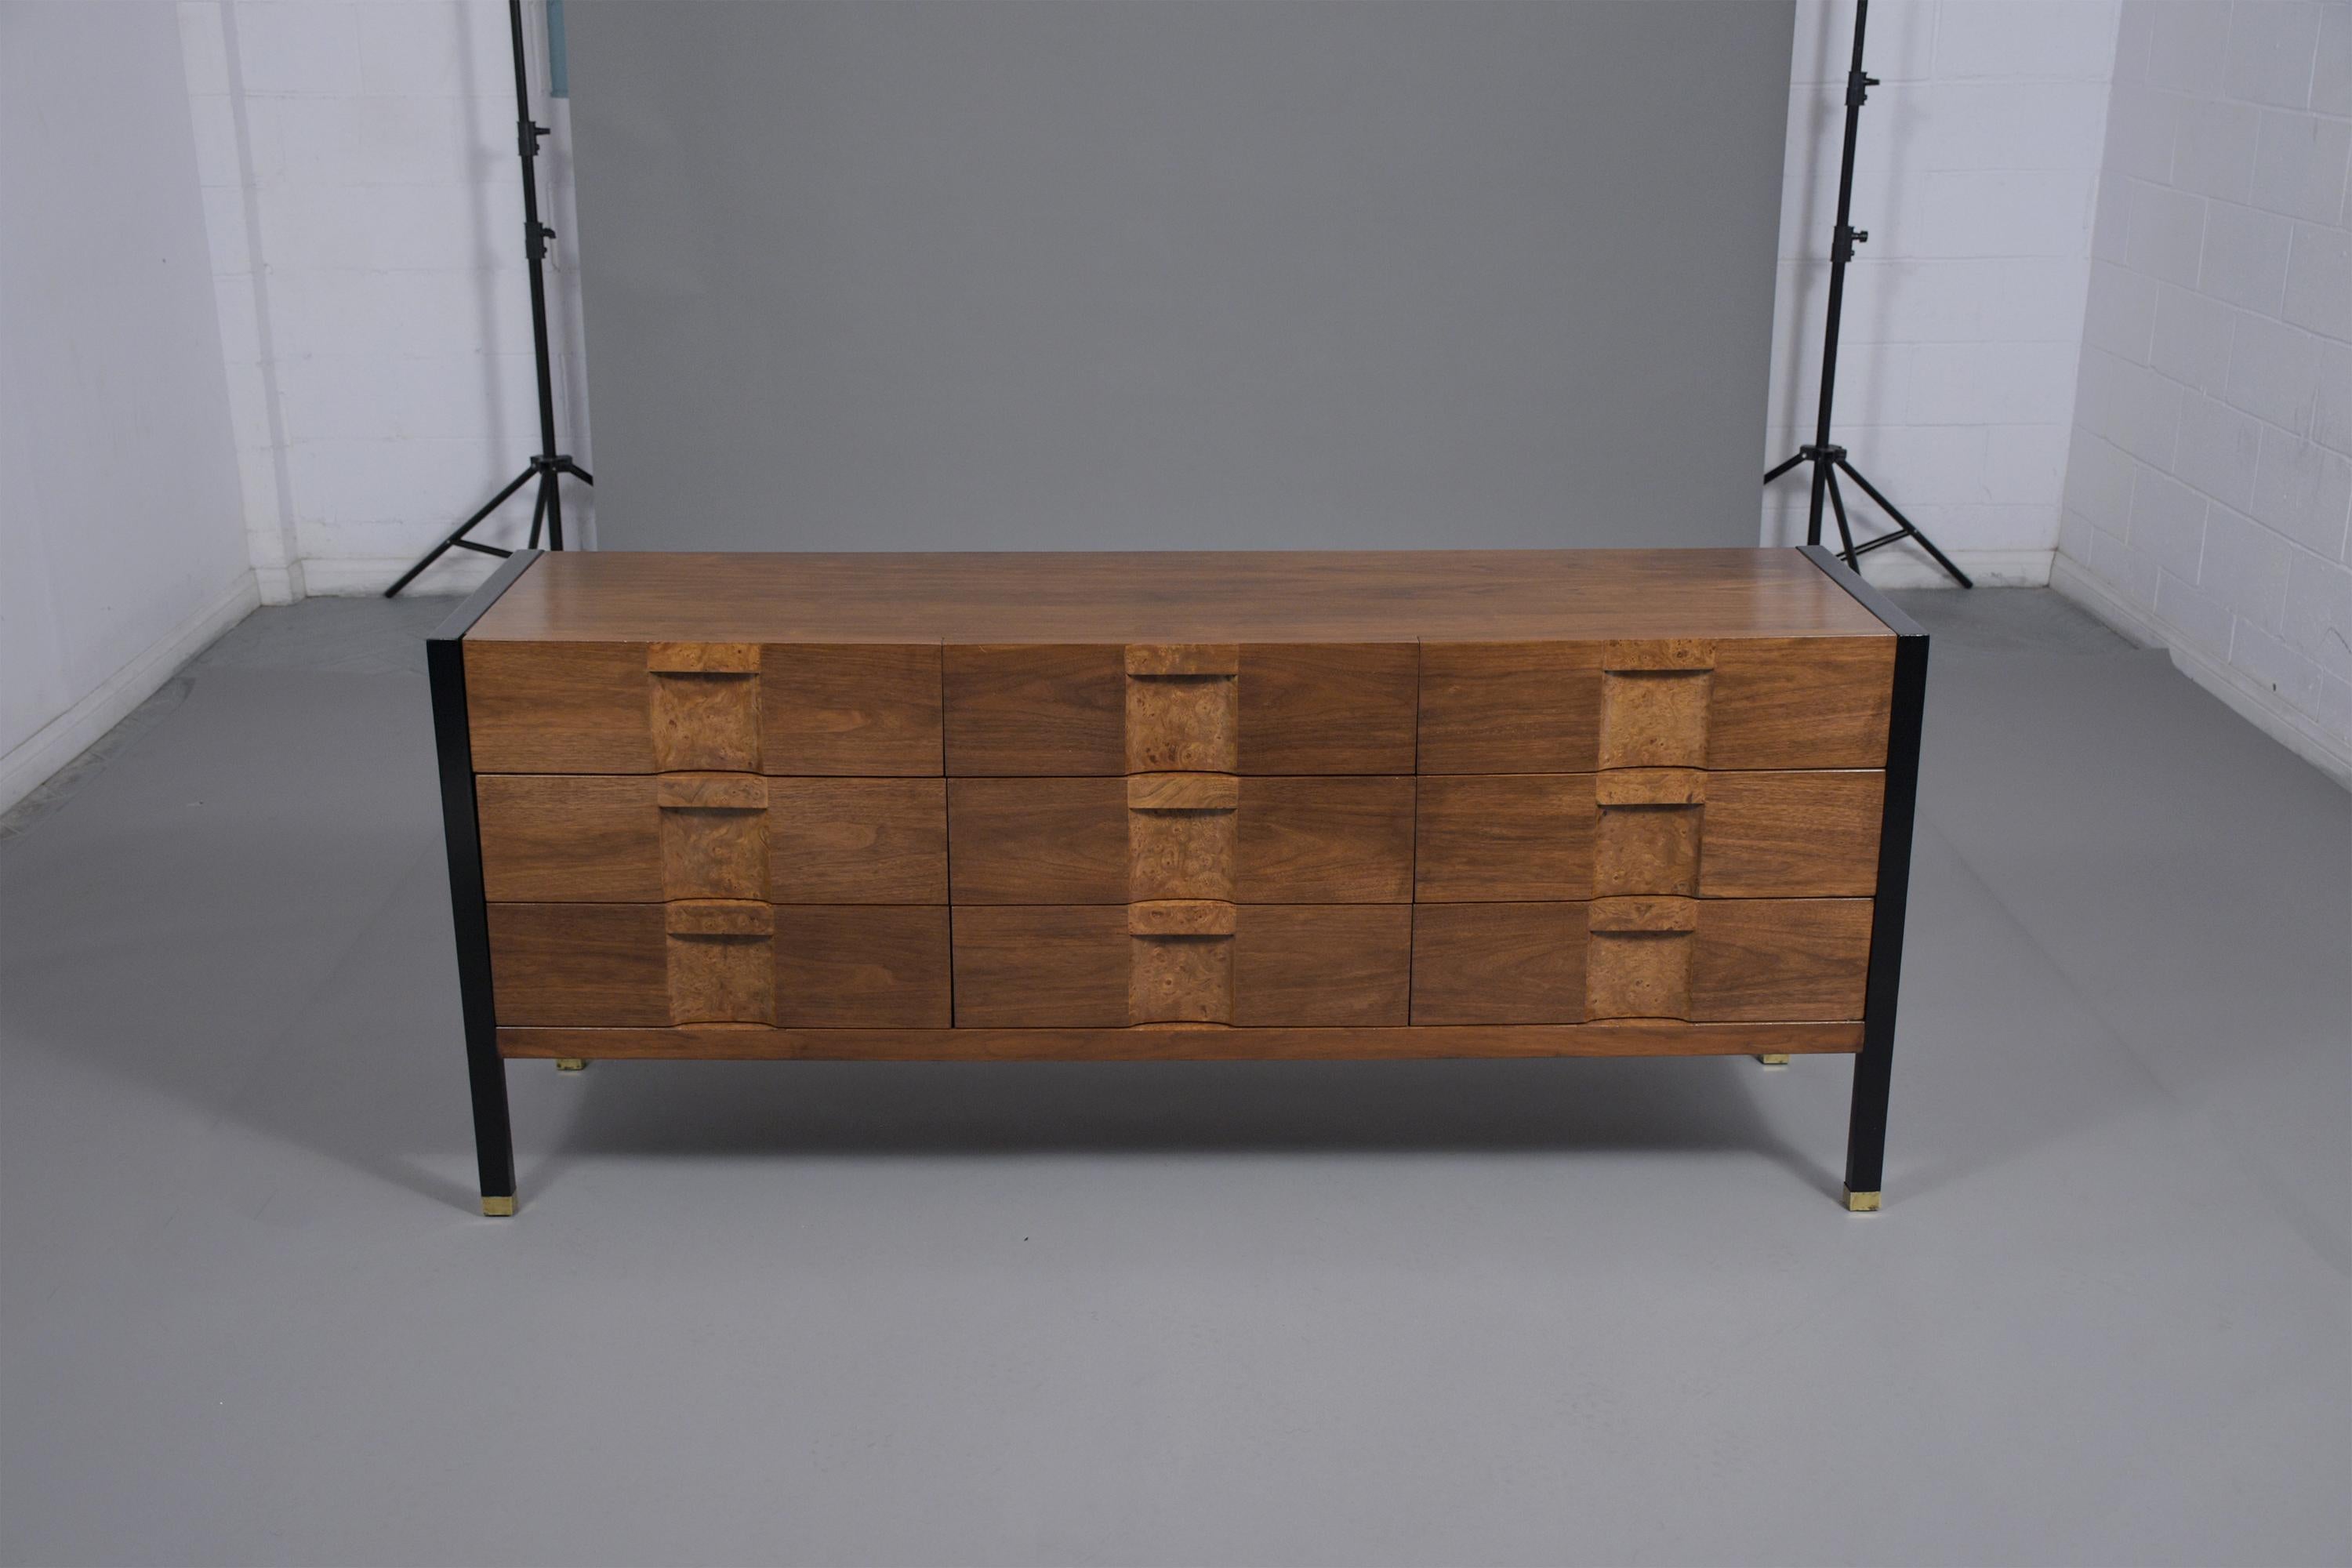 A fully restored mid-century chest of drawers hand-crafted out of walnut wood features a newly stained walnut and ebonized color combination with a lacquered finish. The dresser comes with nine pullout drawers with burled veneer details that open